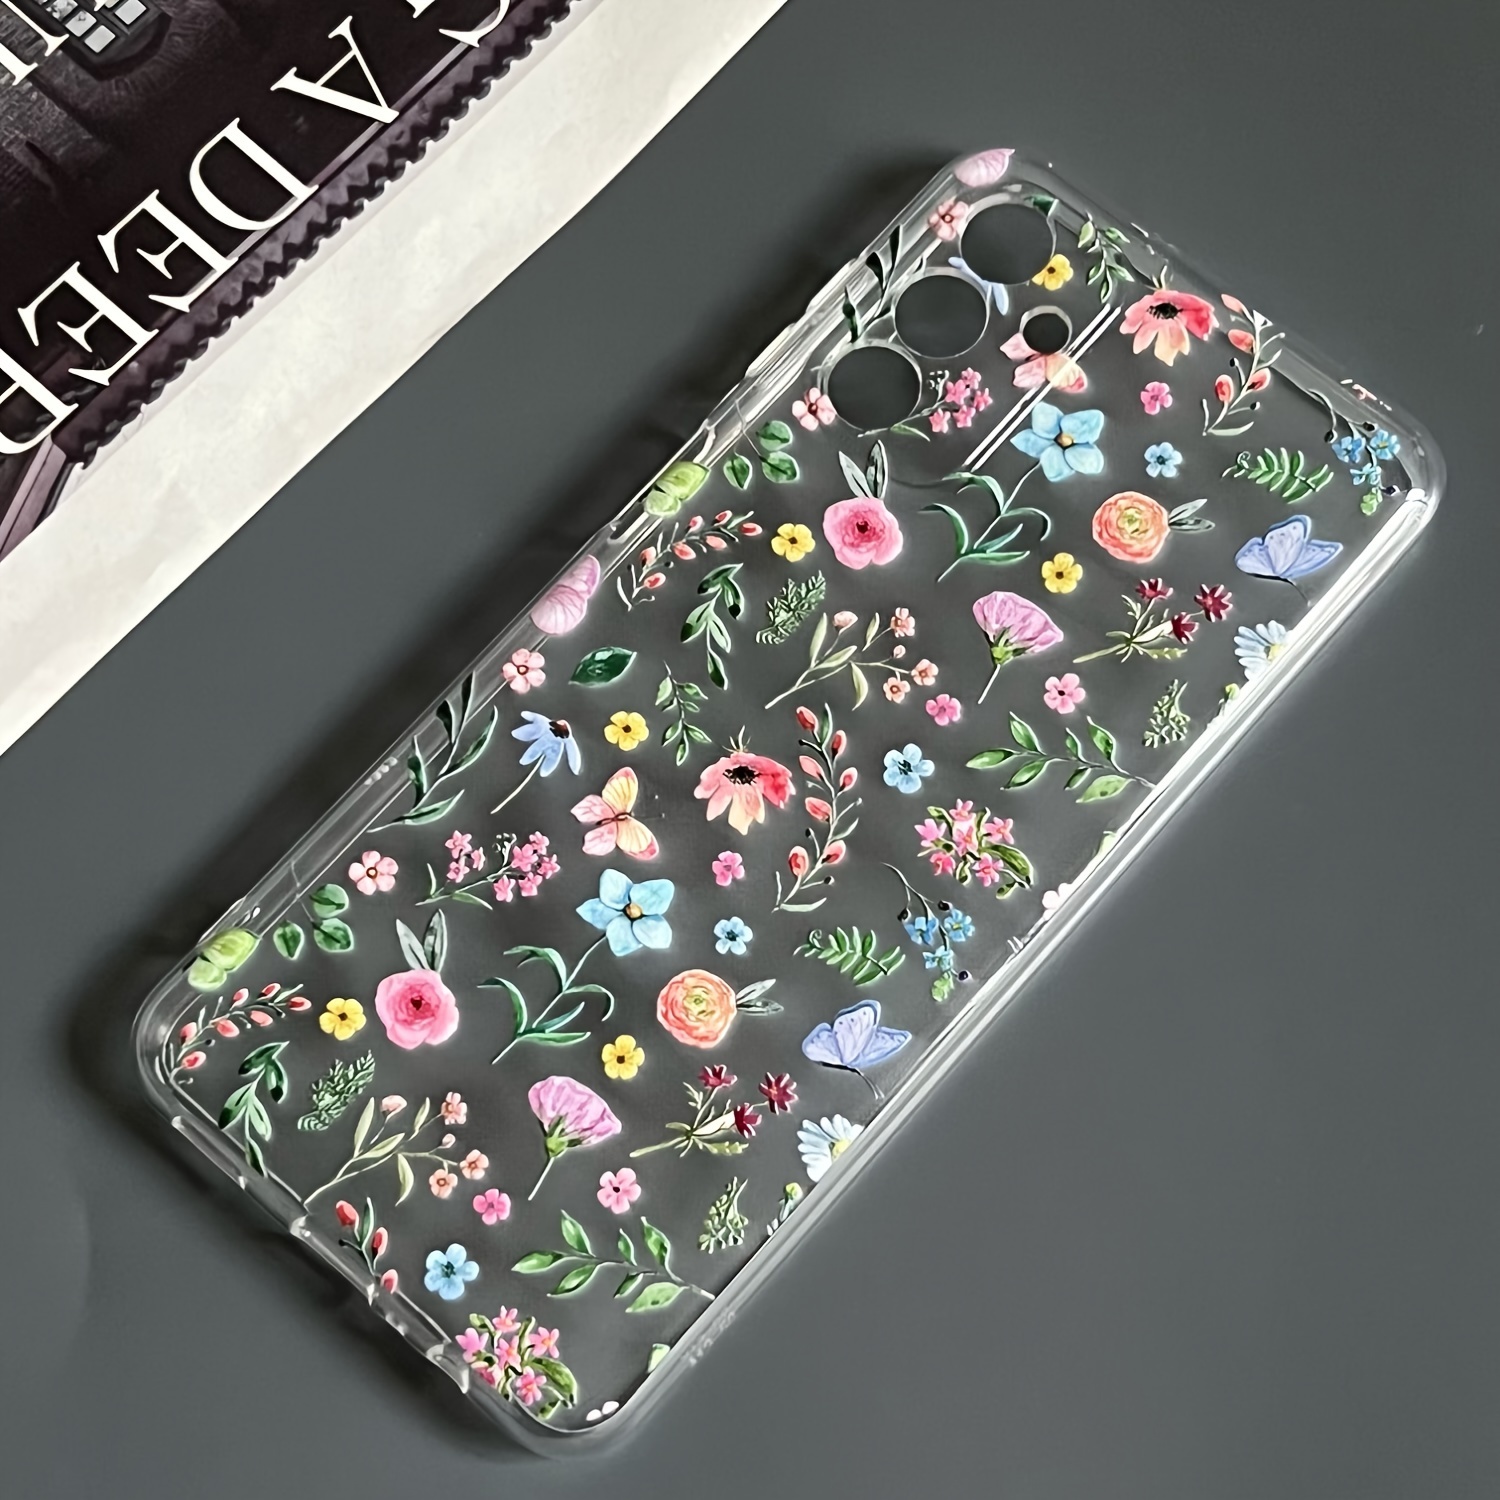  Galaxy S20 Cute Mixed Flower Bouquet Dark Floral Pattern Case :  Cell Phones & Accessories